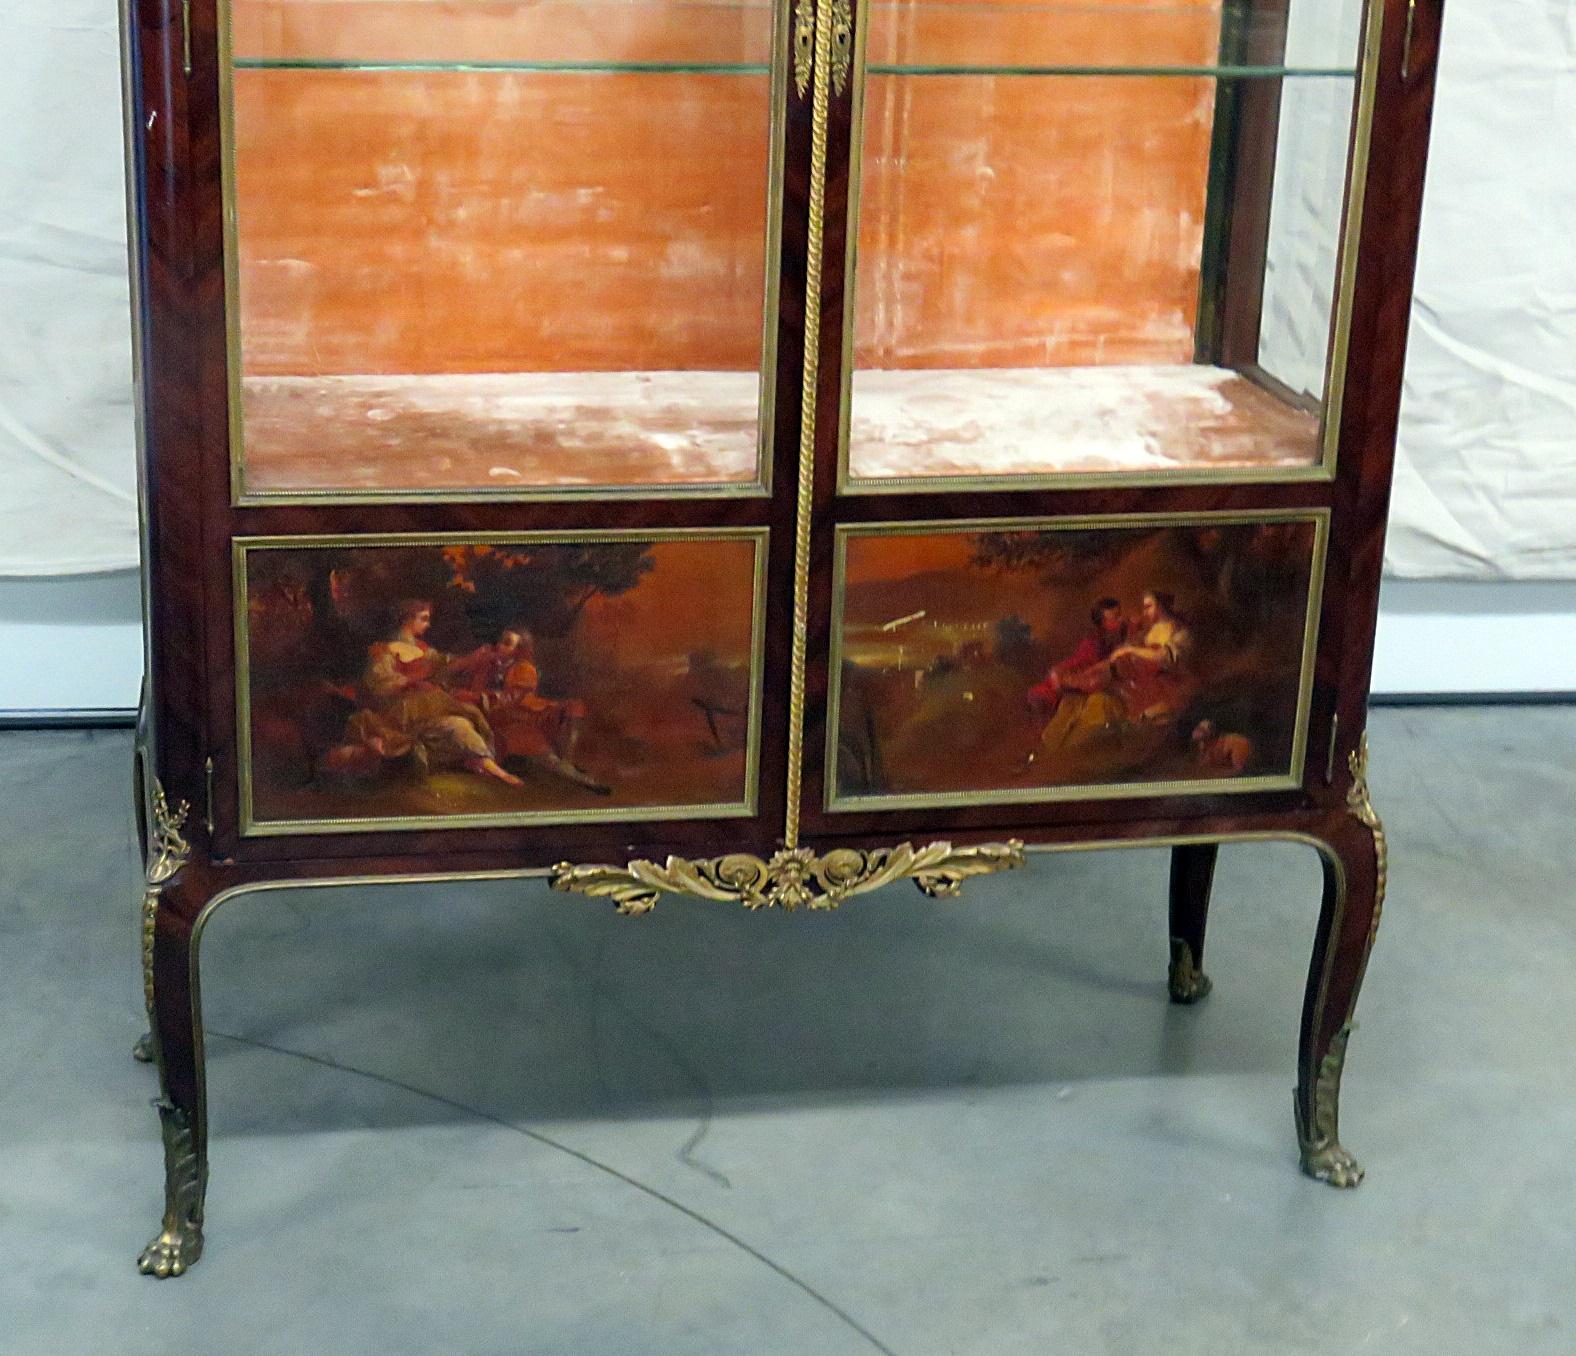 This is a superb Francois Linke Vitrine. This is not attributed, this is genuine. The rouge marble sits atop a stunning hand-painted Vernis Martin courtship scene and features the best possible bronze ormolu depicting puttis and various expertly